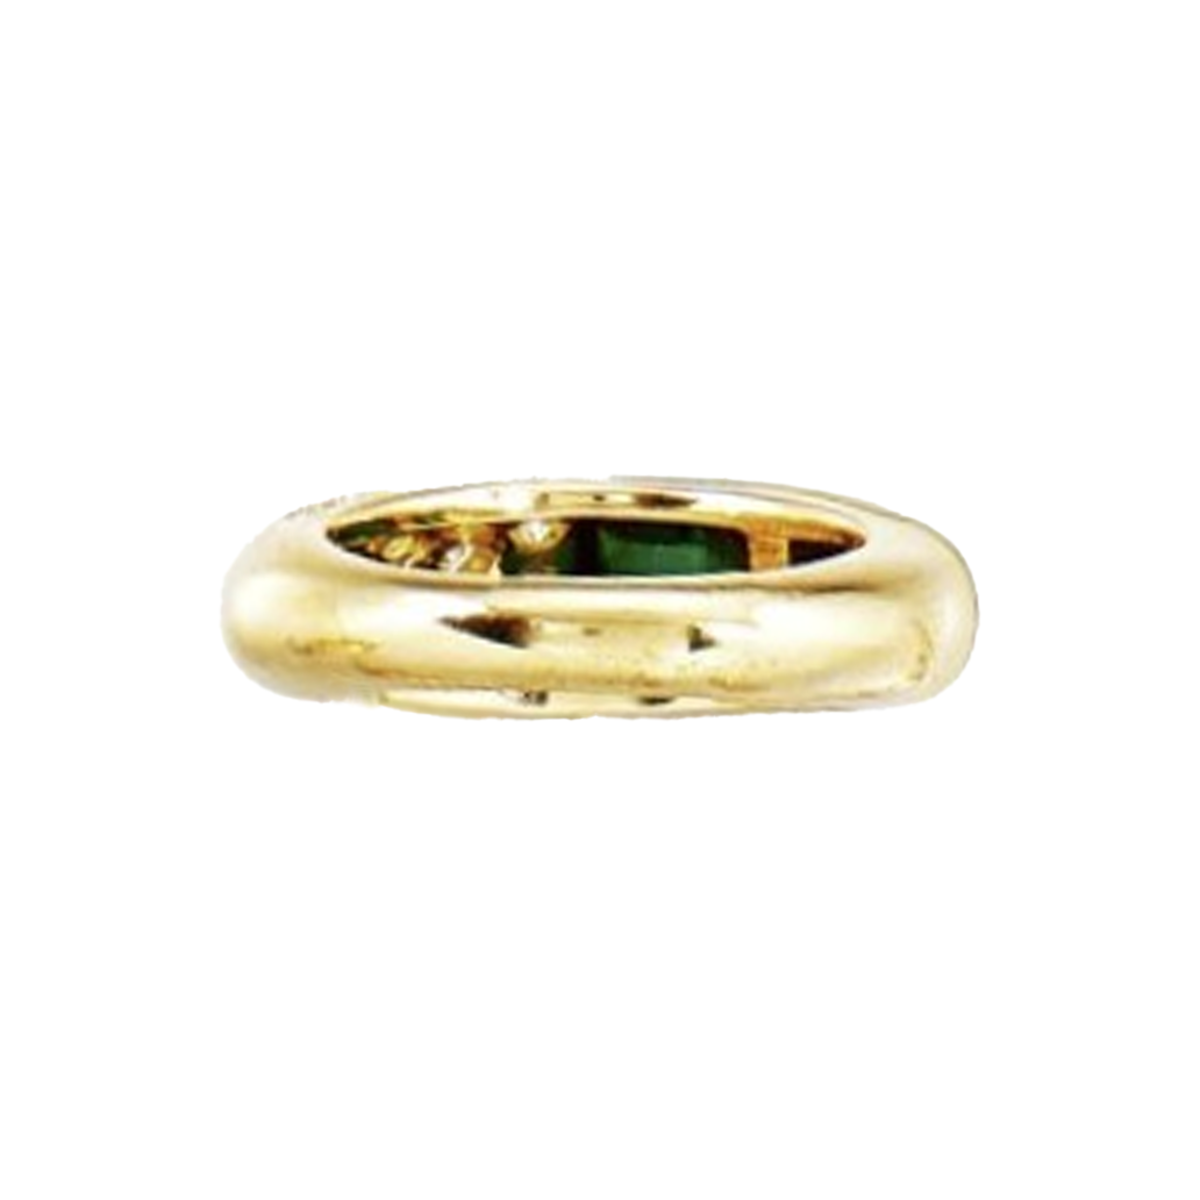 Cartier 1980s 18KT Yellow Gold Chalcedony & Diamond Ring back view